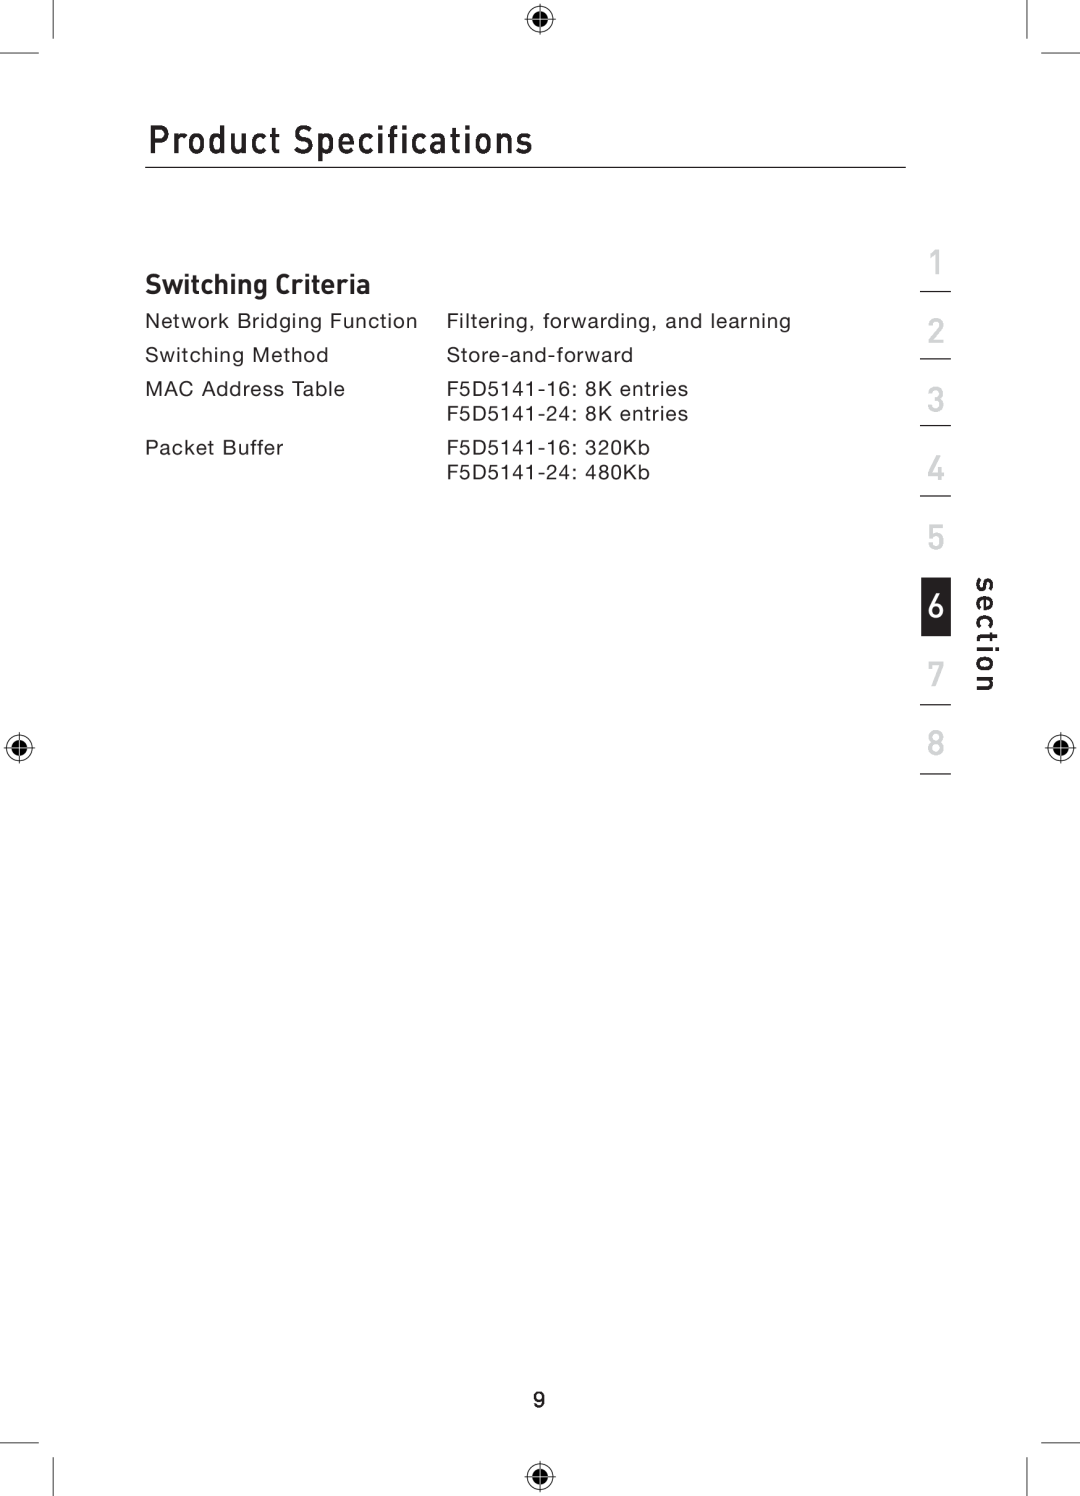 Belkin P75179ea manual Switching Criteria, Product Specifications, section 